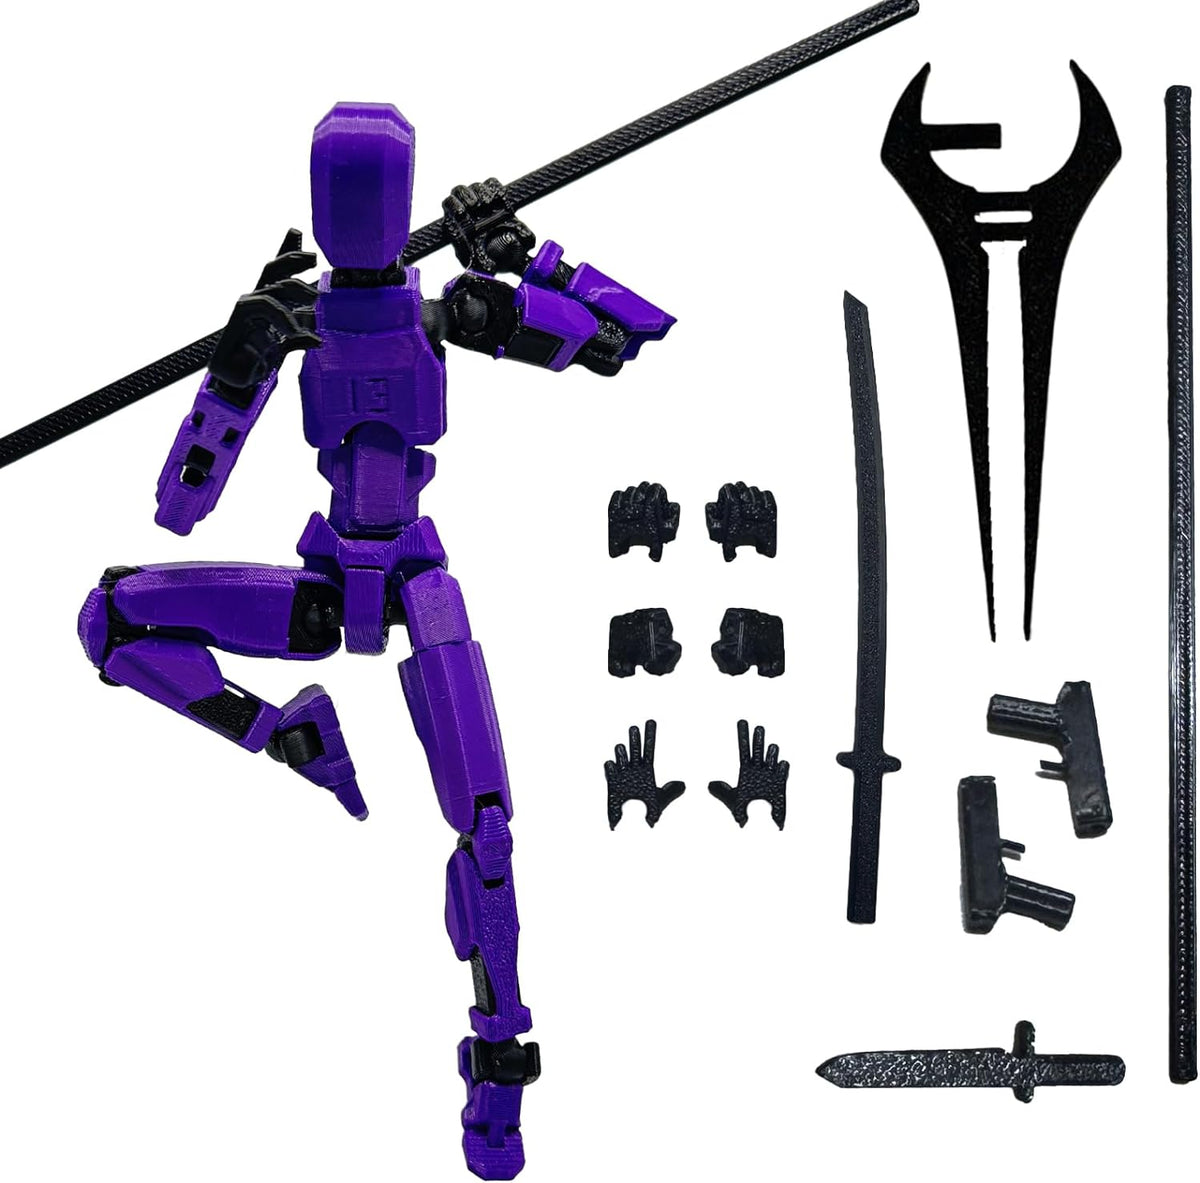 3D Printed 5.54-inch Movable Robot T13 Action Figure Dummy13, Full Body Mechanical Doll, Hand Painted Figures